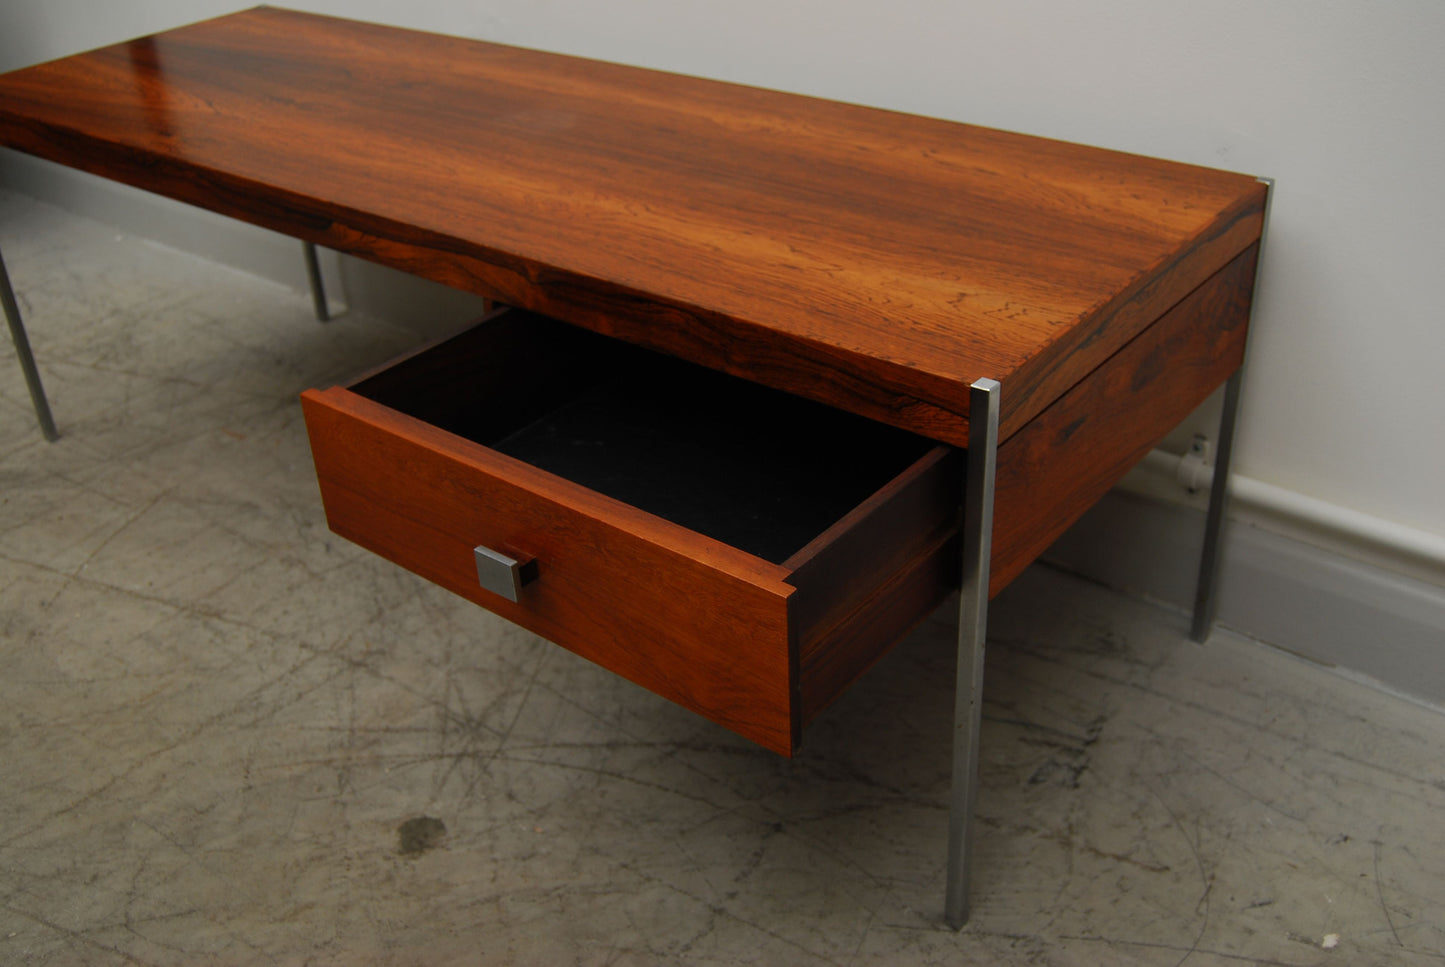 Rosewood coffee table / TV table